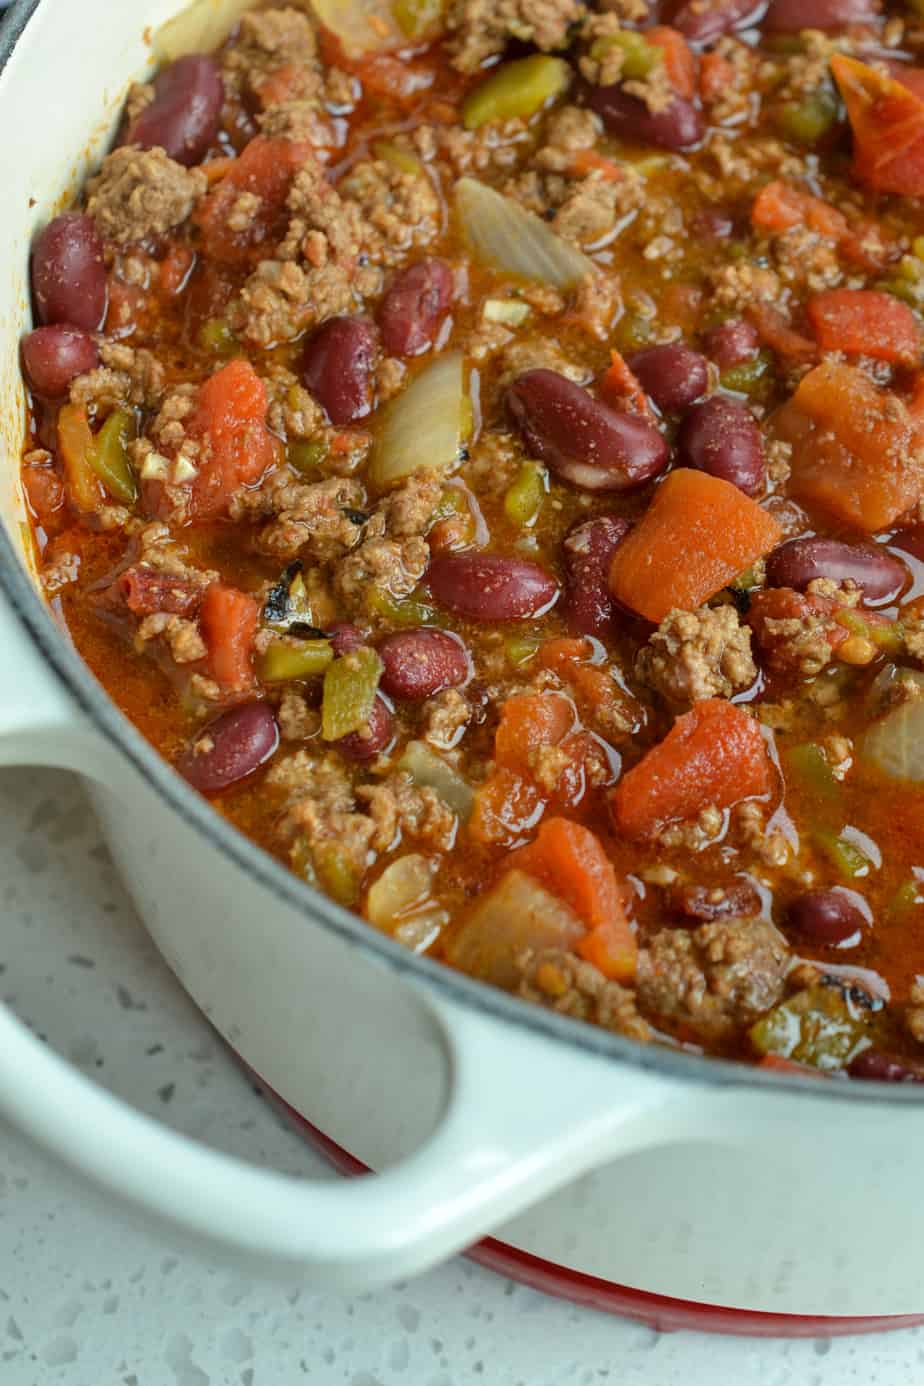 My Best Chili Recipe is a thick beef and bean chili with a bit of smokey heat and a little brown sugar to mellow everything. 